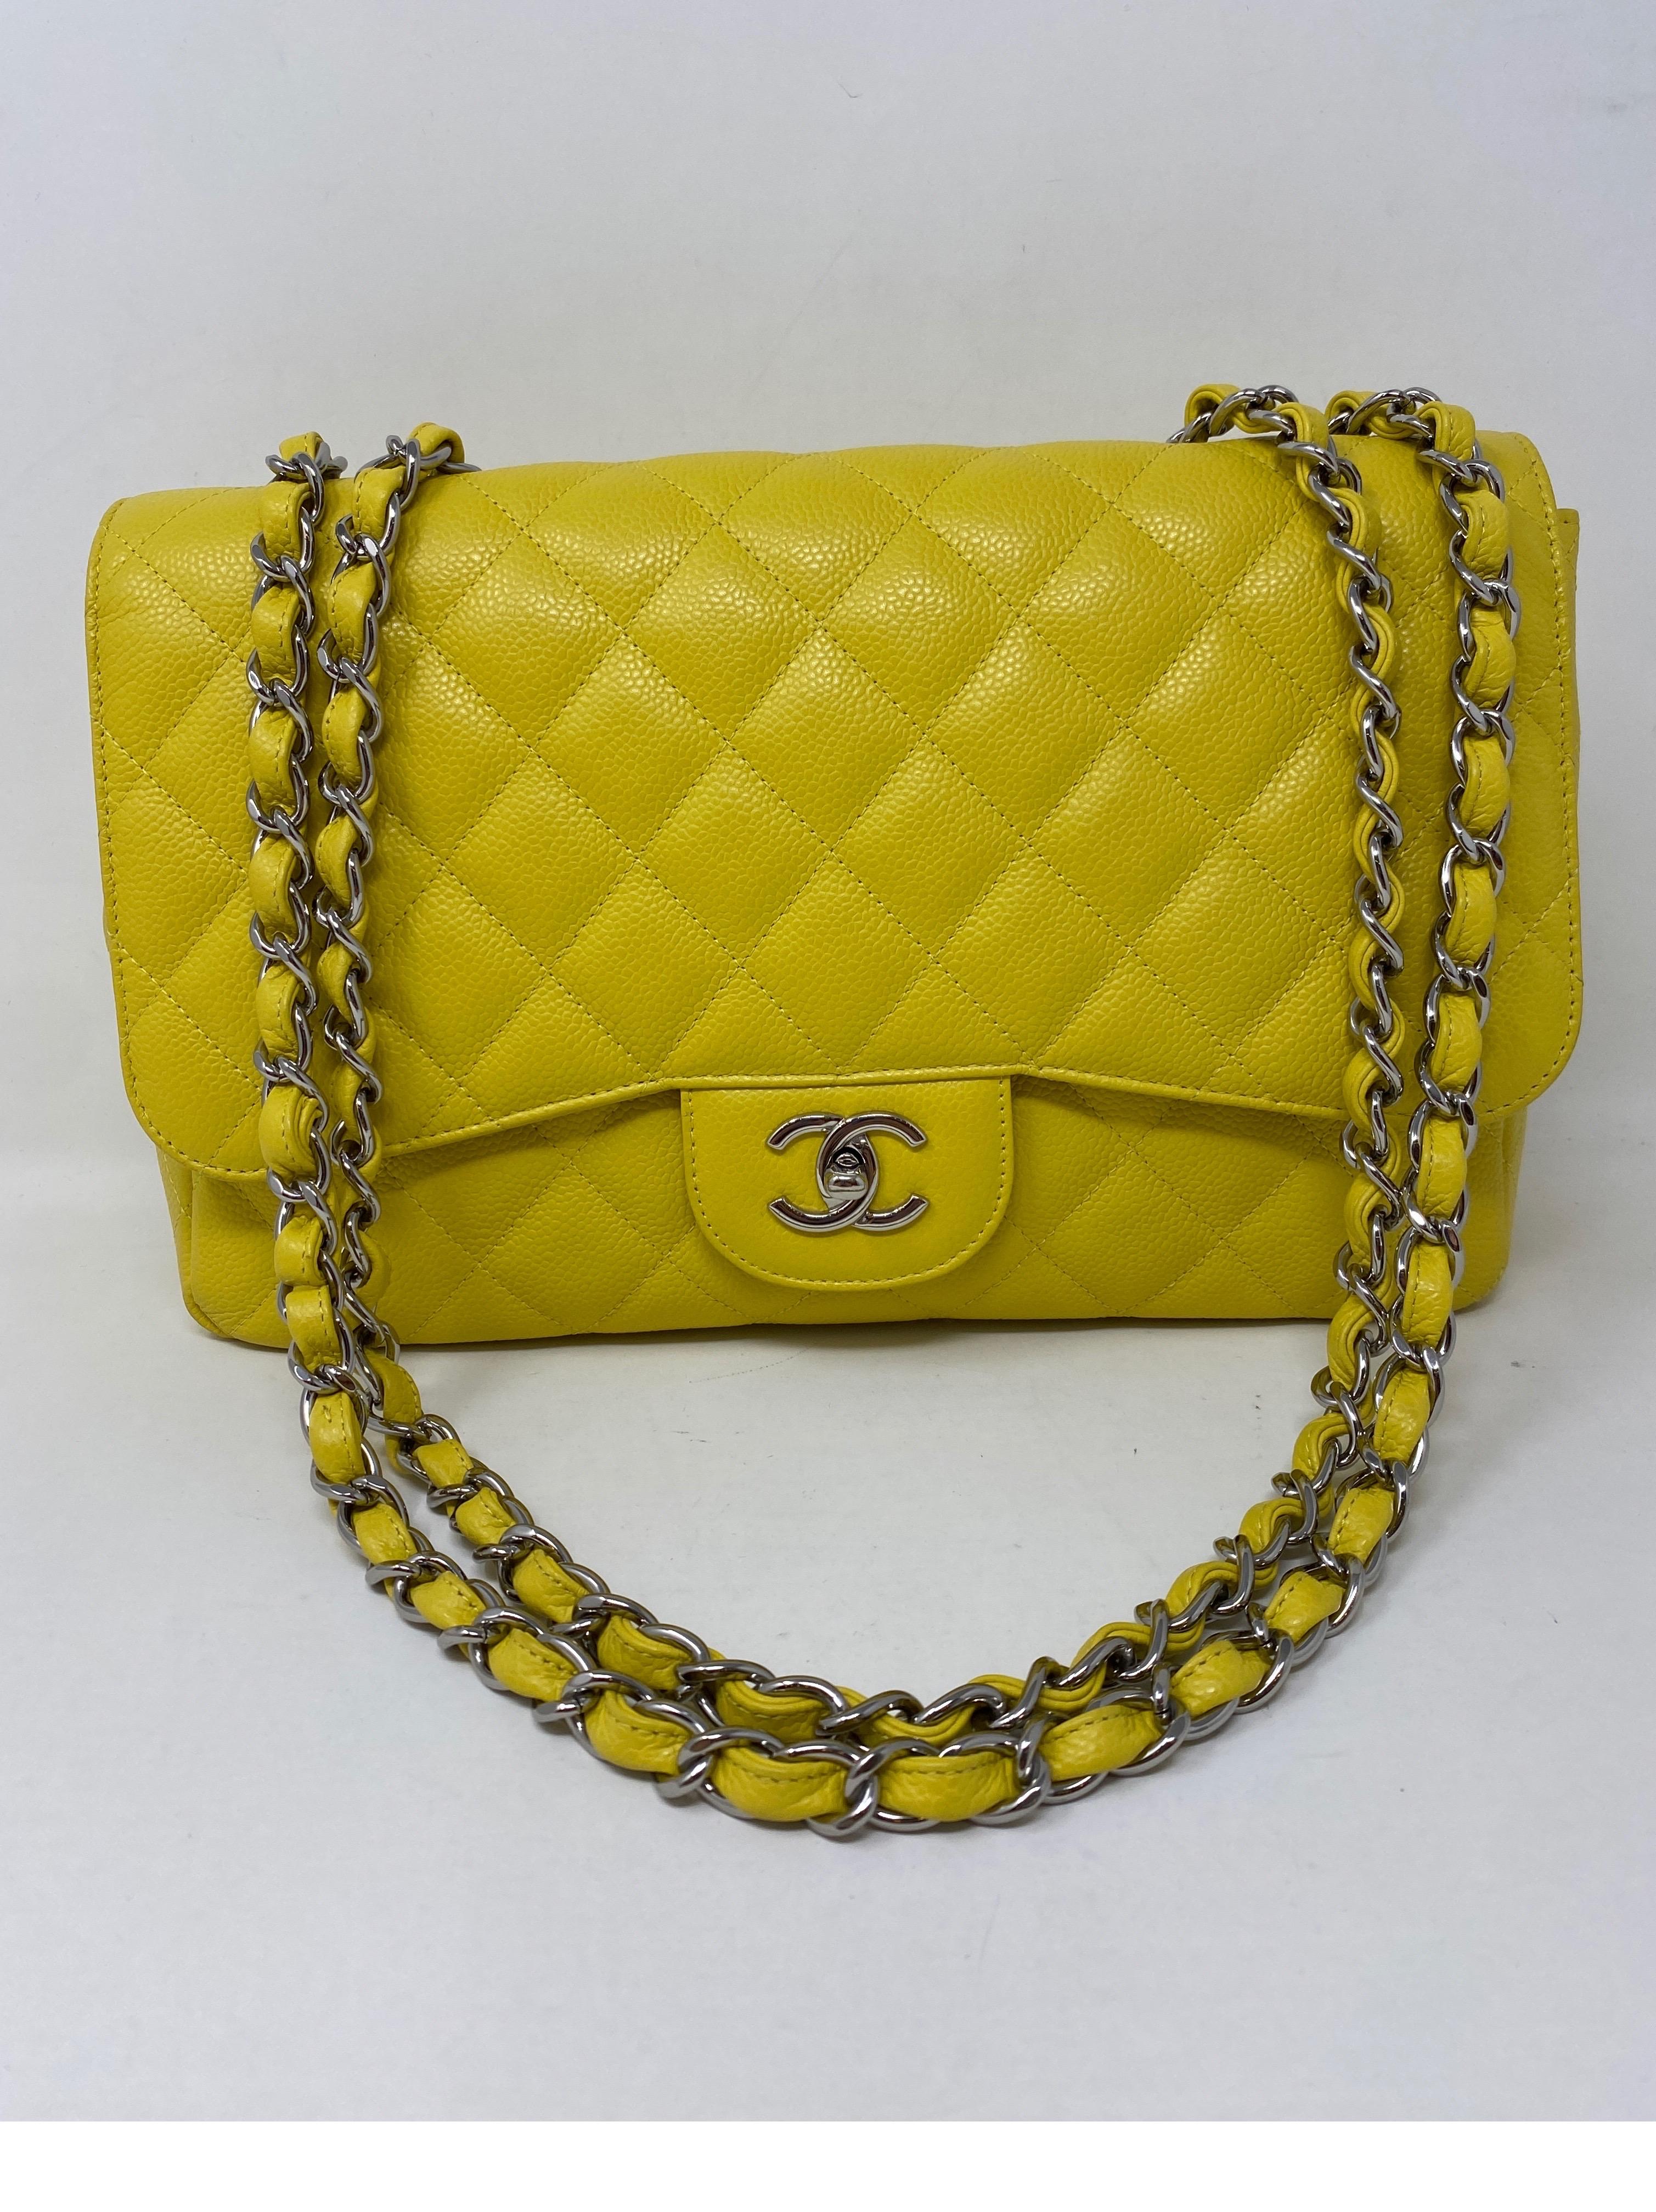 Chanel Yellow Jumbo Bag. Caviar bright canary yellow color. Silver hardware. Excellent condition. Rare color. Guaranteed authentic. 